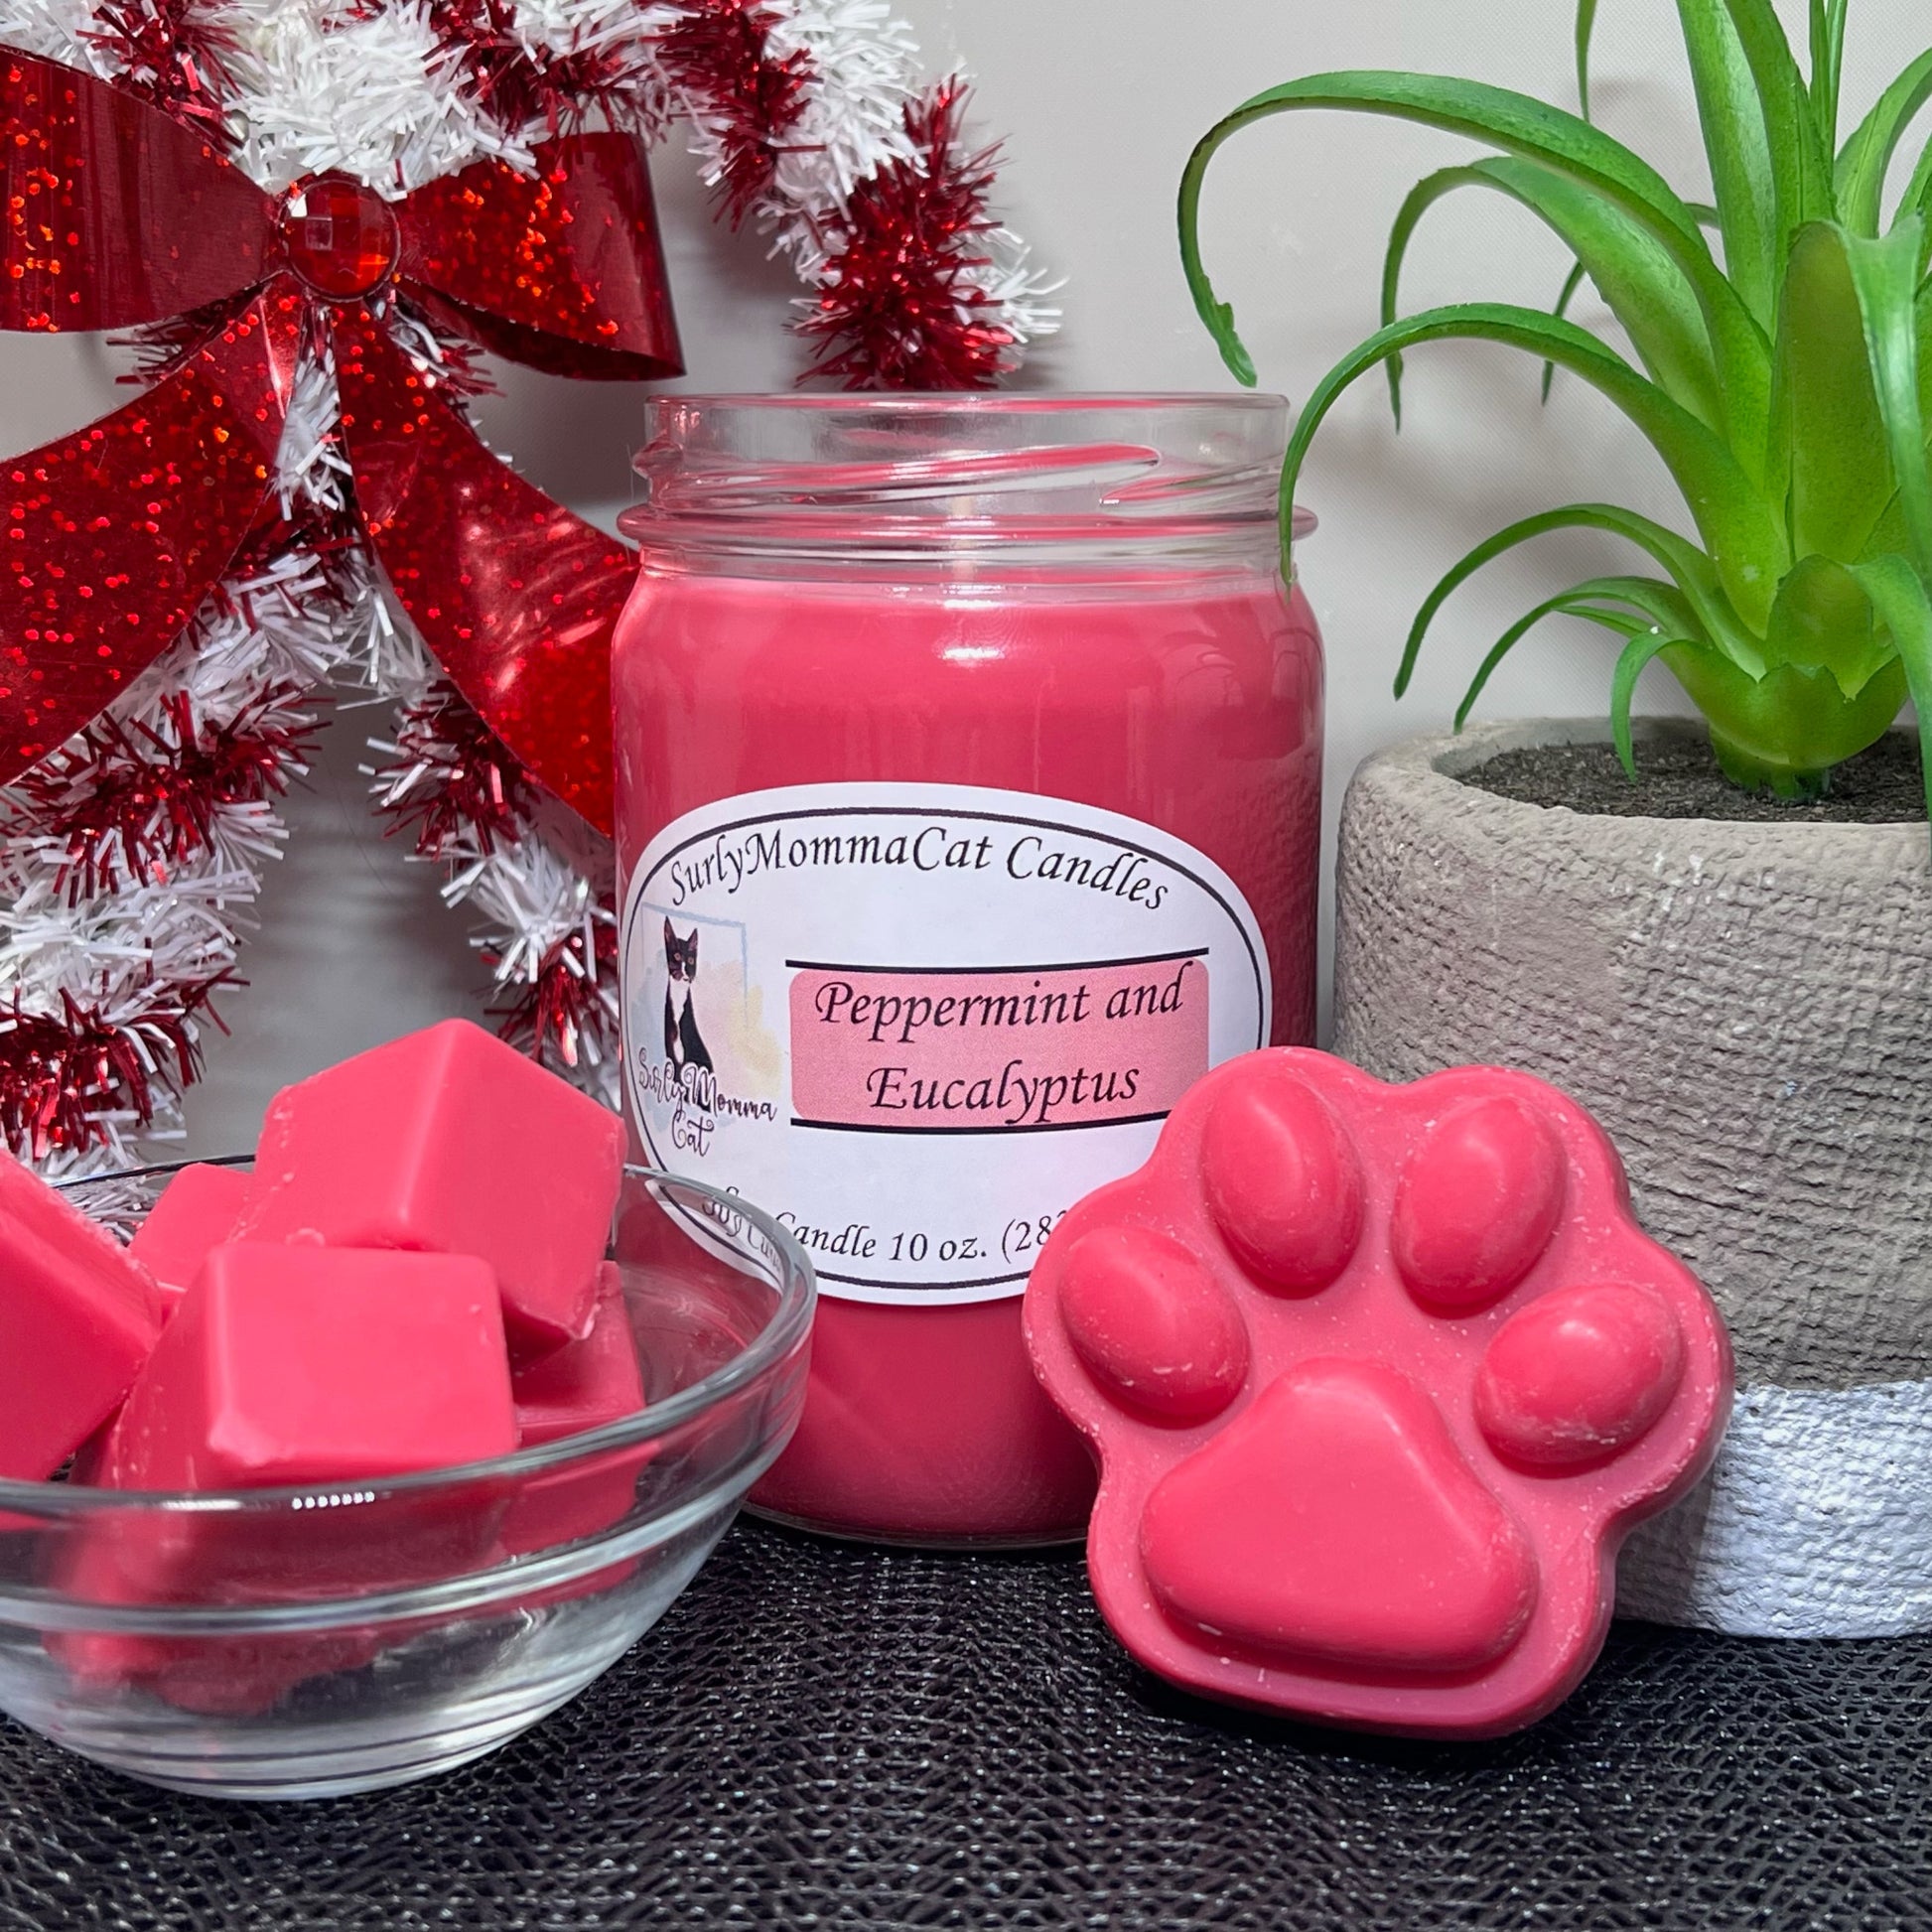 Peppermint and Eucalyptus Candles and Wax Melts – SurlyMommaCat